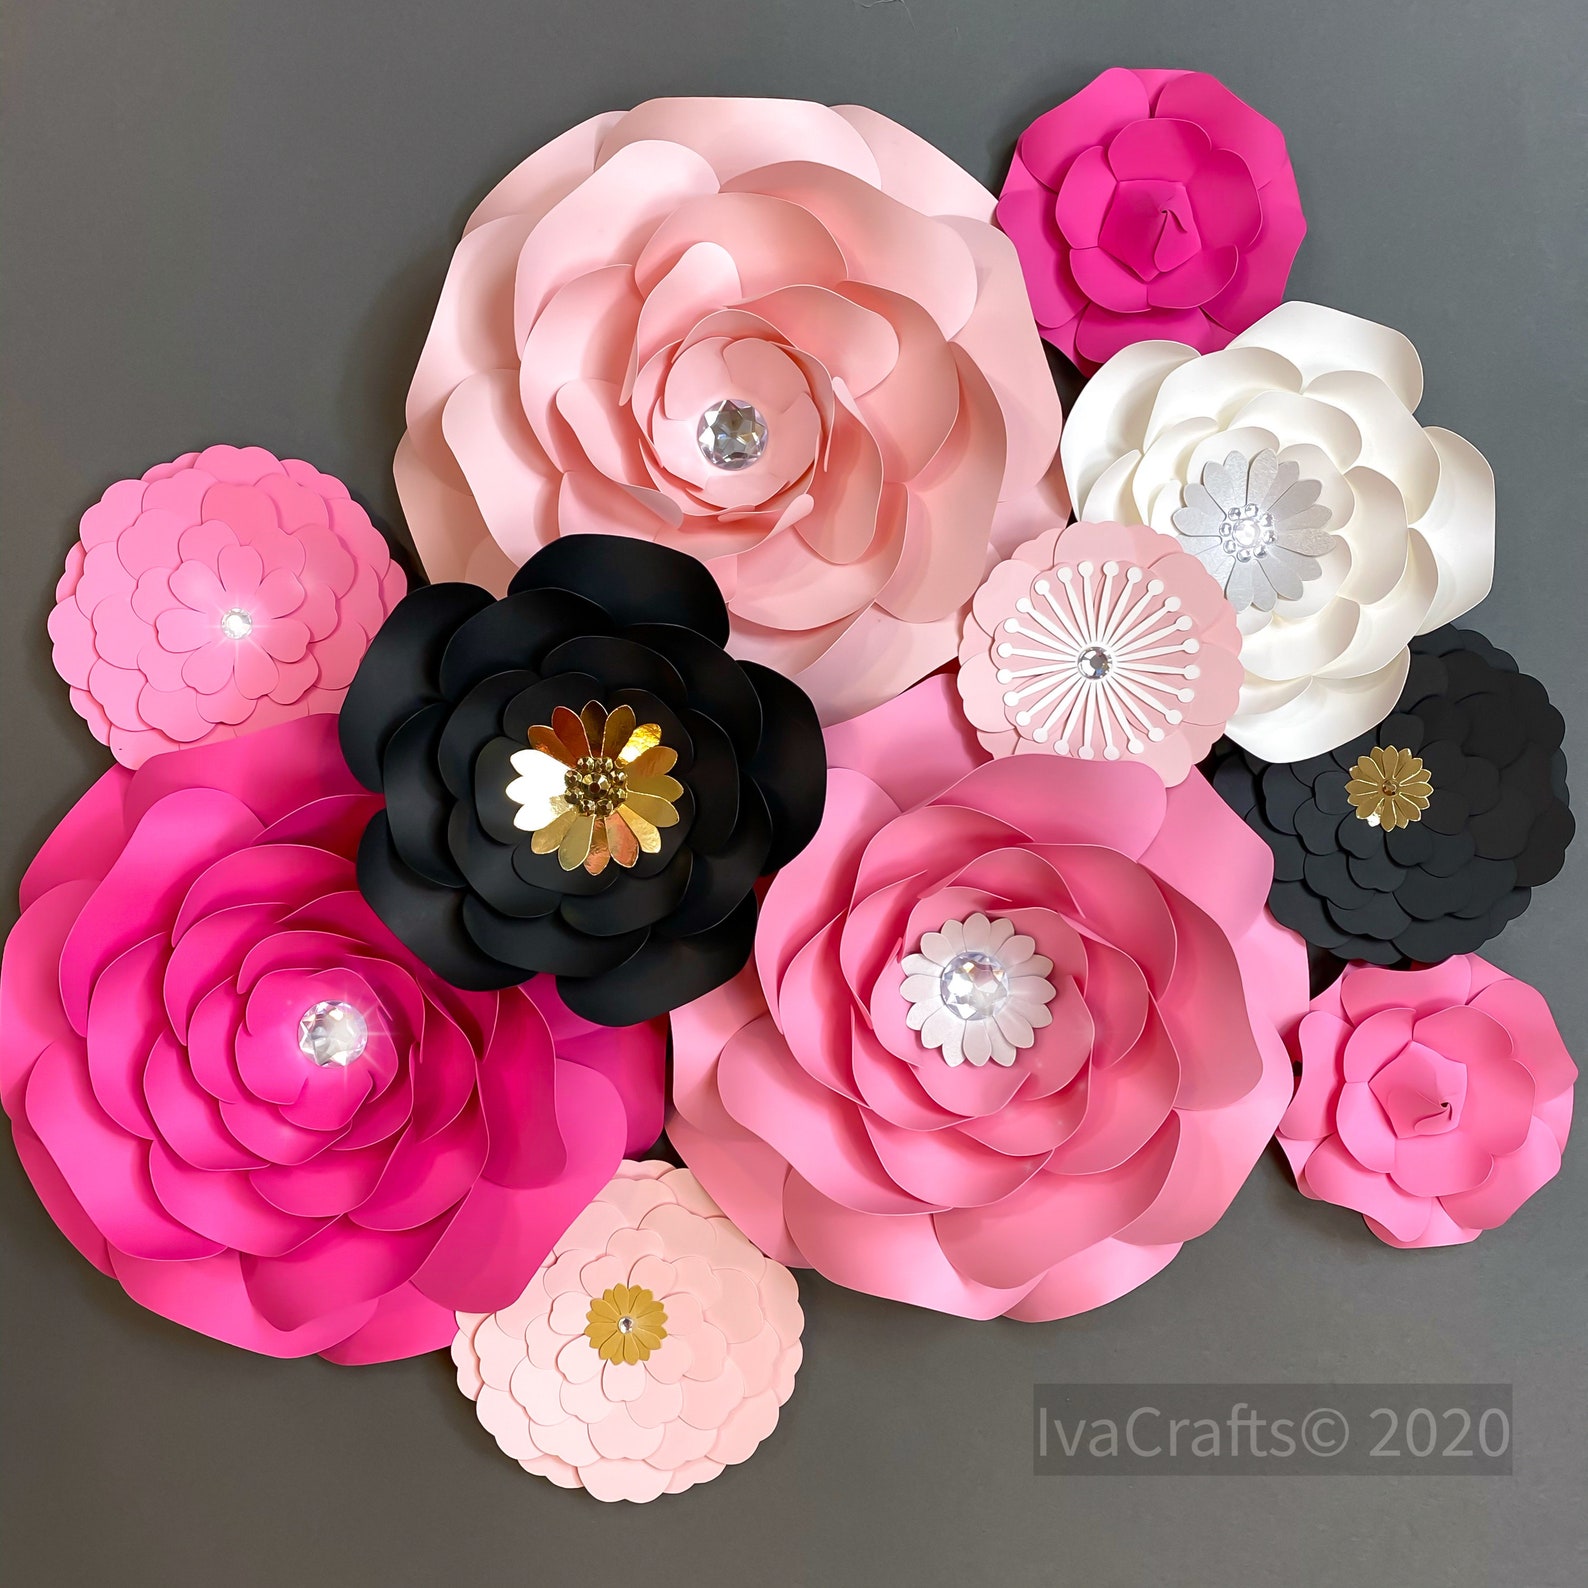 Paper Flower Wall Decor Set of 11 Bridal Shower Party - Etsy